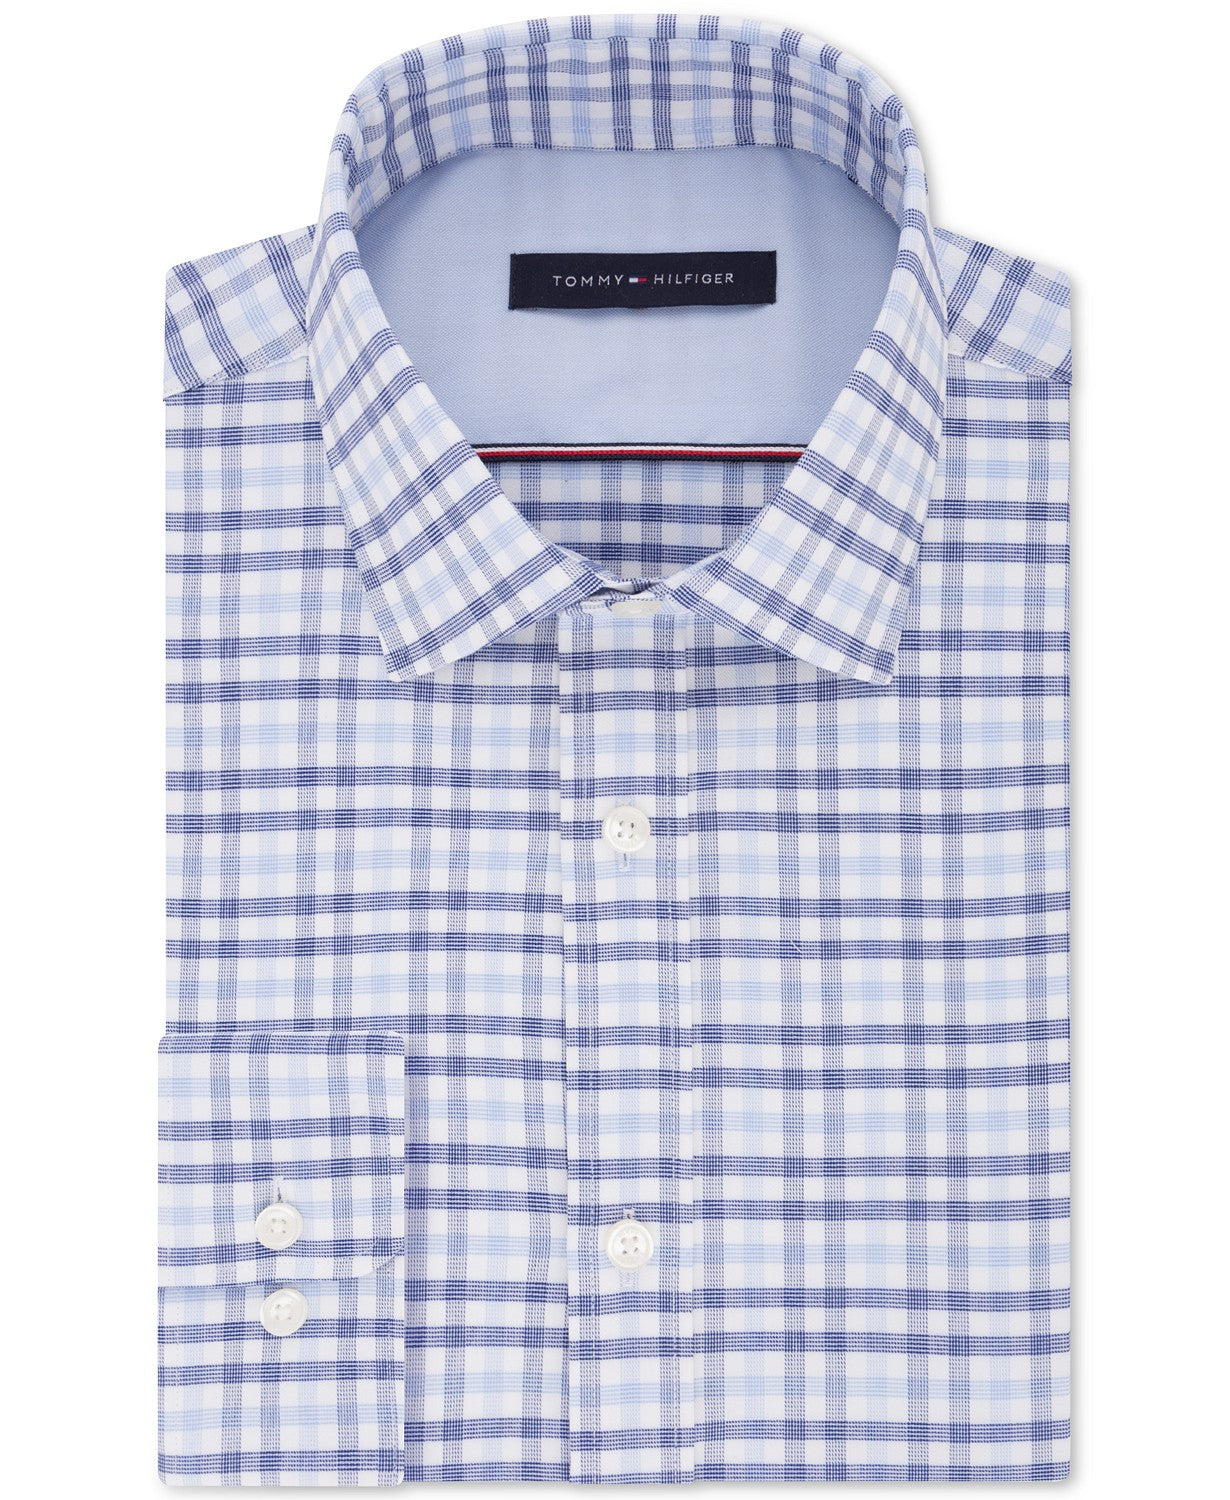 Tommy Hilfiger Men's Fitted Performance Stretch Blue Check Dress Shirt Blue Size 16.5x36-37